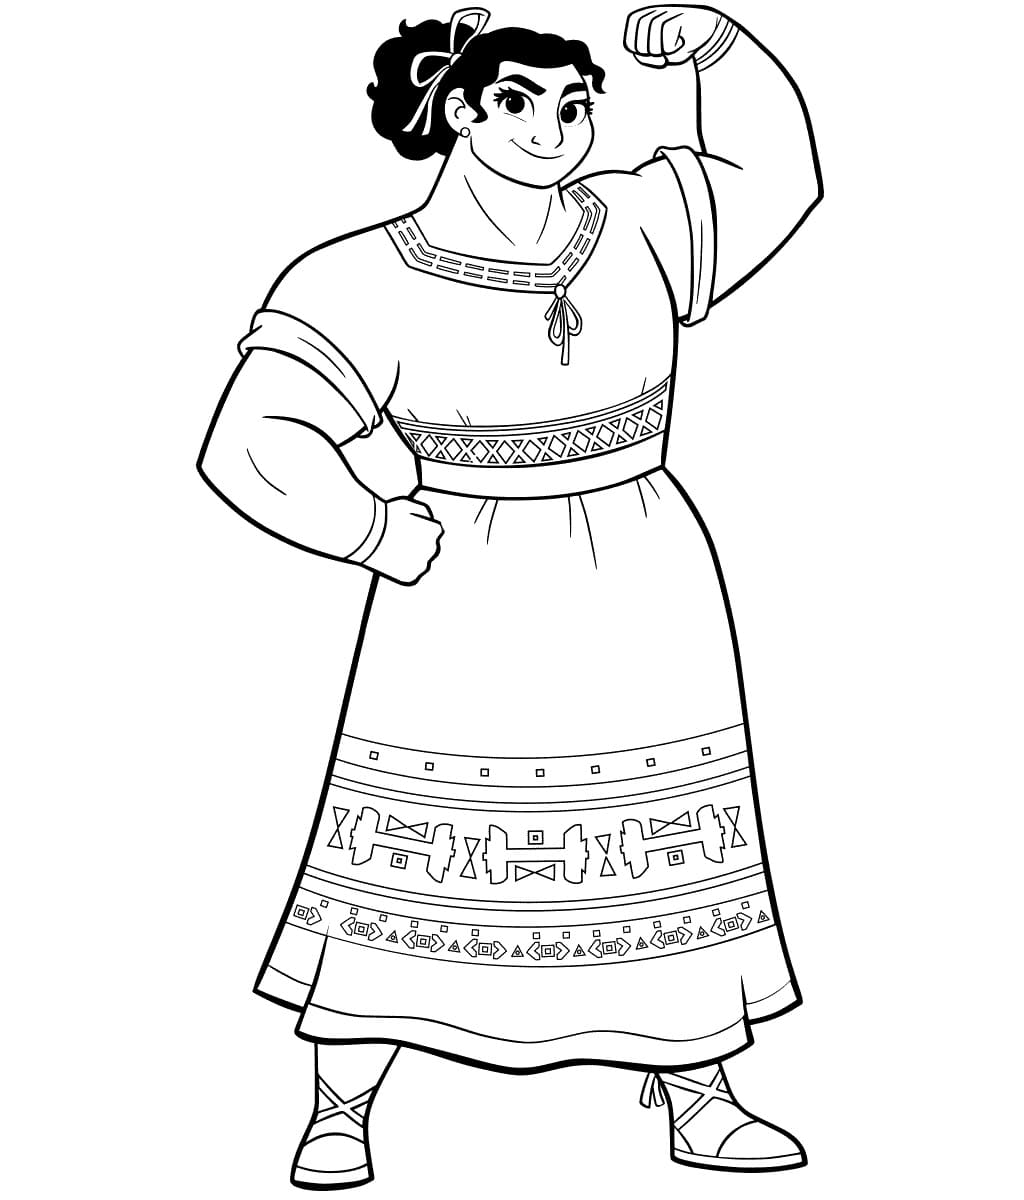 Luisa from encanto coloring page